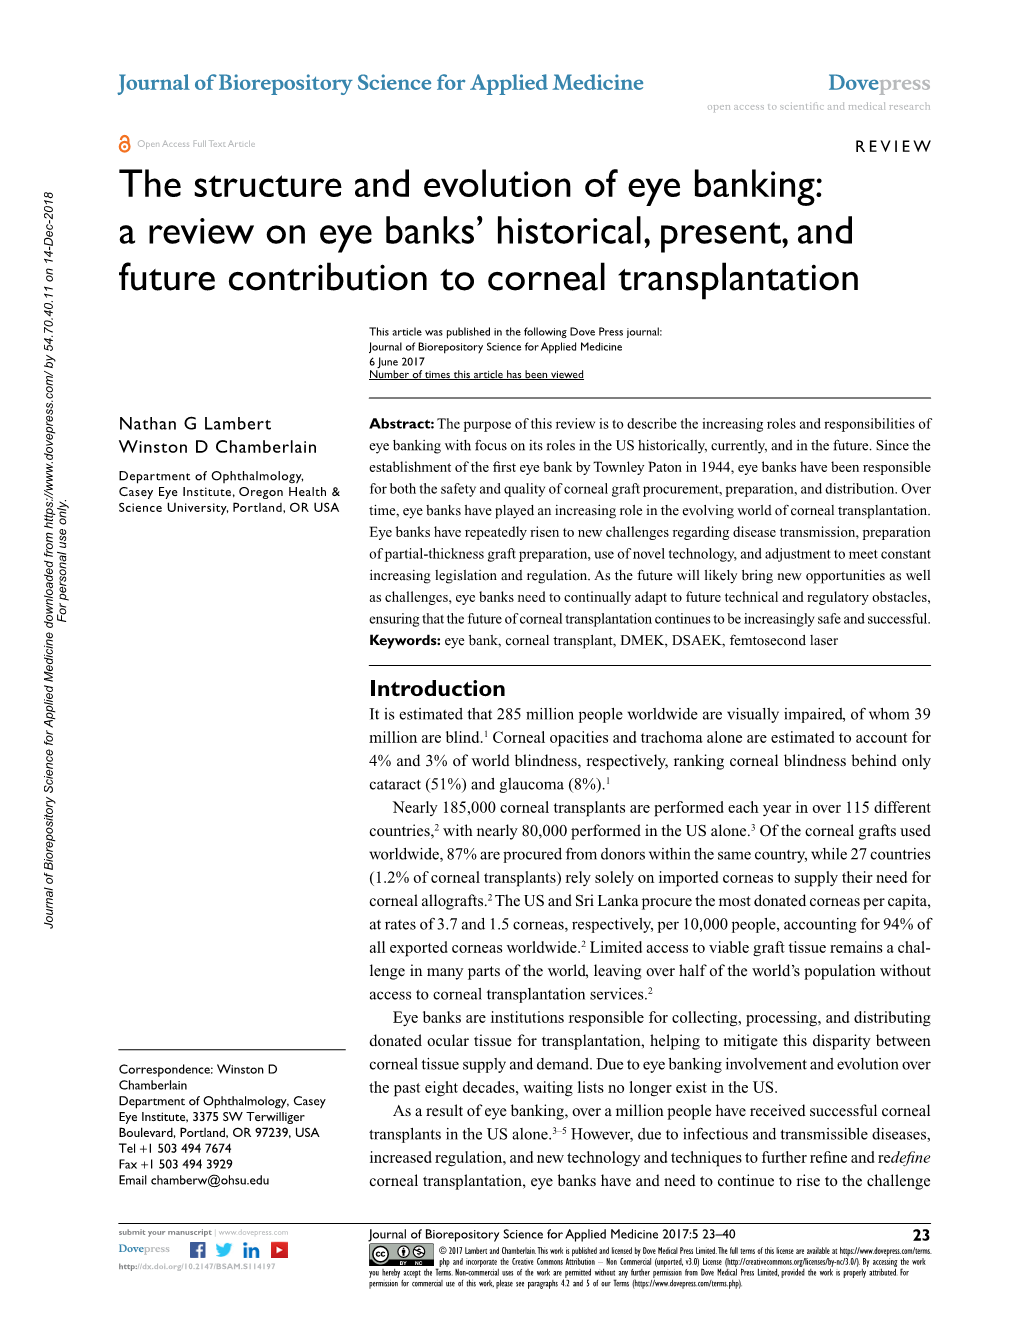 The Structure and Evolution of Eye Banking: a Review on Eye Banks’ Historical, Present, and Future Contribution to Corneal Transplantation